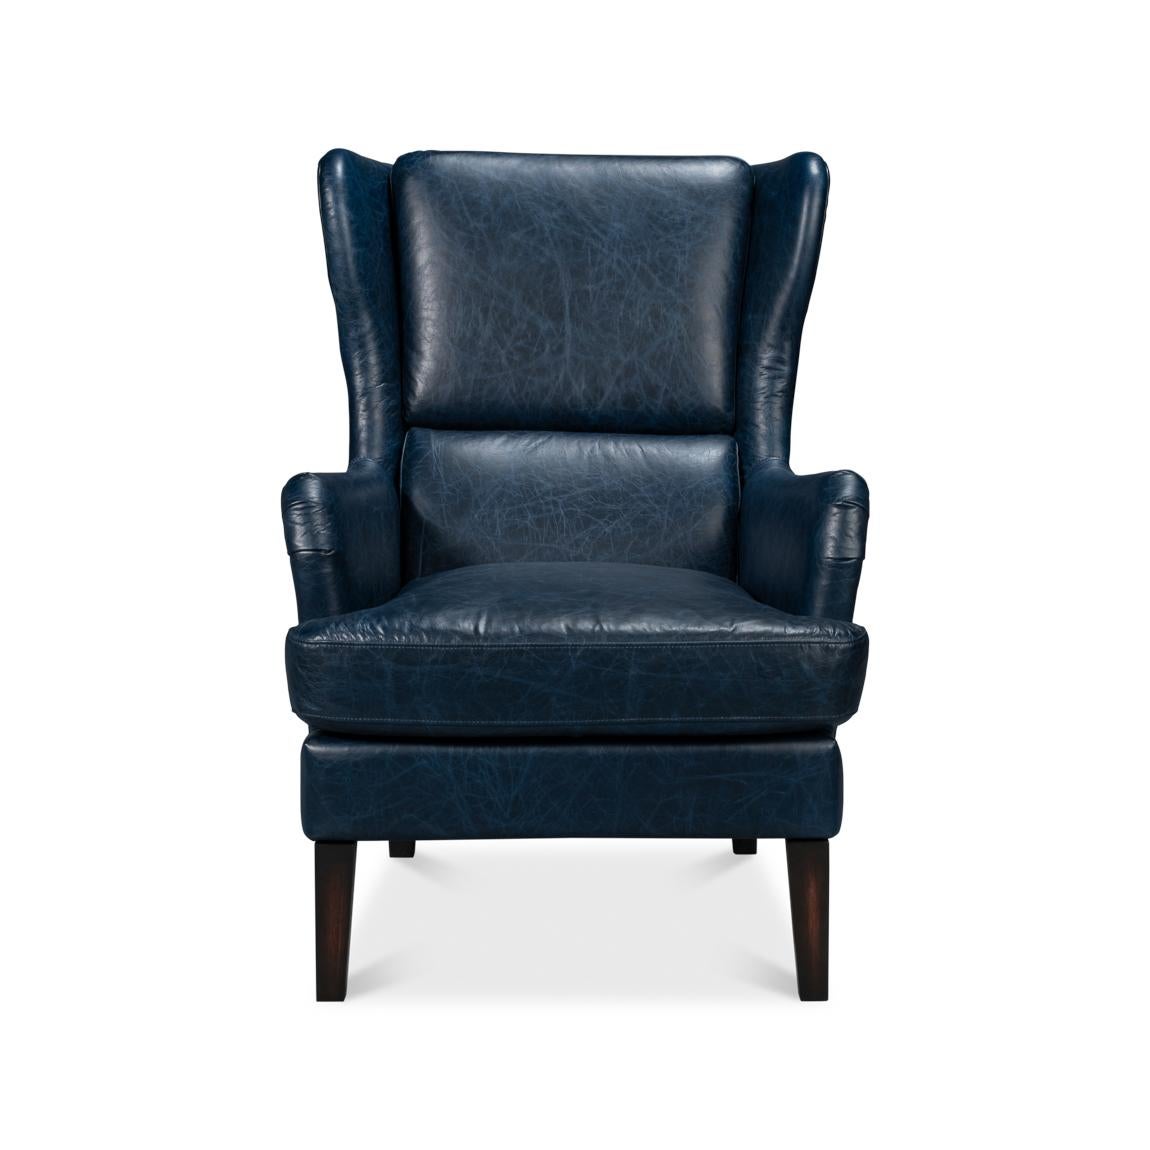 With the Chateau Blue traditional top grain Vintage style leather, with high classic wingback backrest and boxed cushion seat raised on tapered legs. 
Dimensions: 28